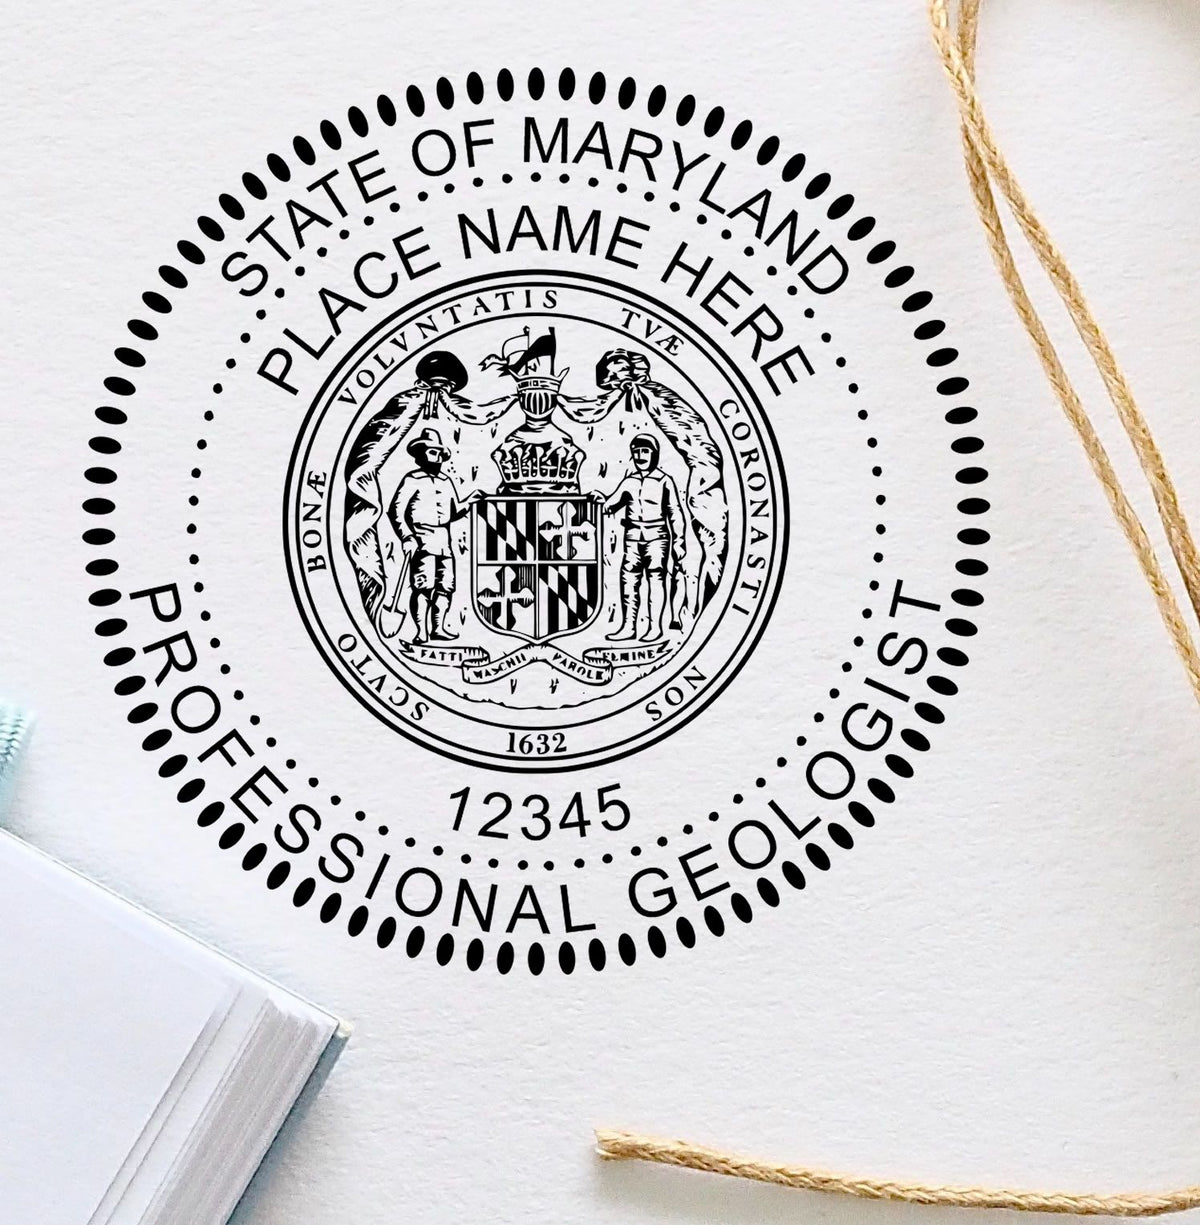 A stamped imprint of the Digital Maryland Geologist Stamp, Electronic Seal for Maryland Geologist in this stylish lifestyle photo, setting the tone for a unique and personalized product.